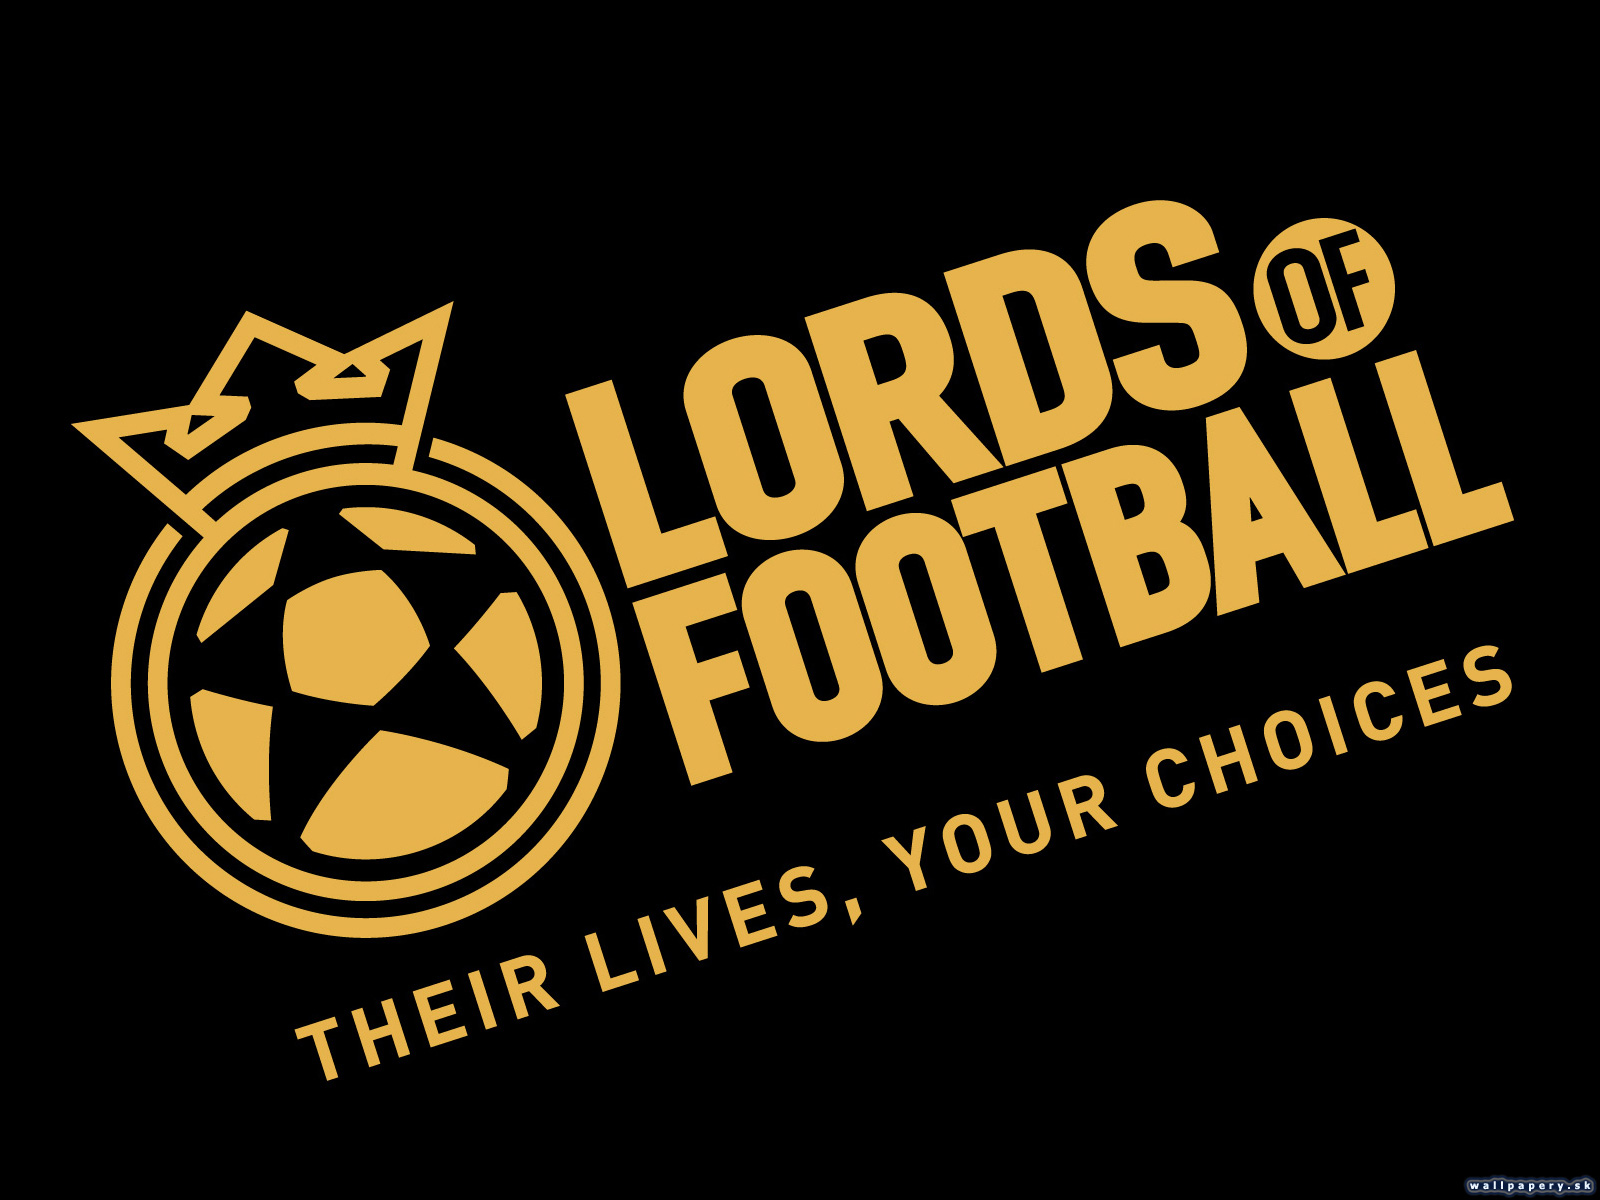 Lords of Football - wallpaper 6